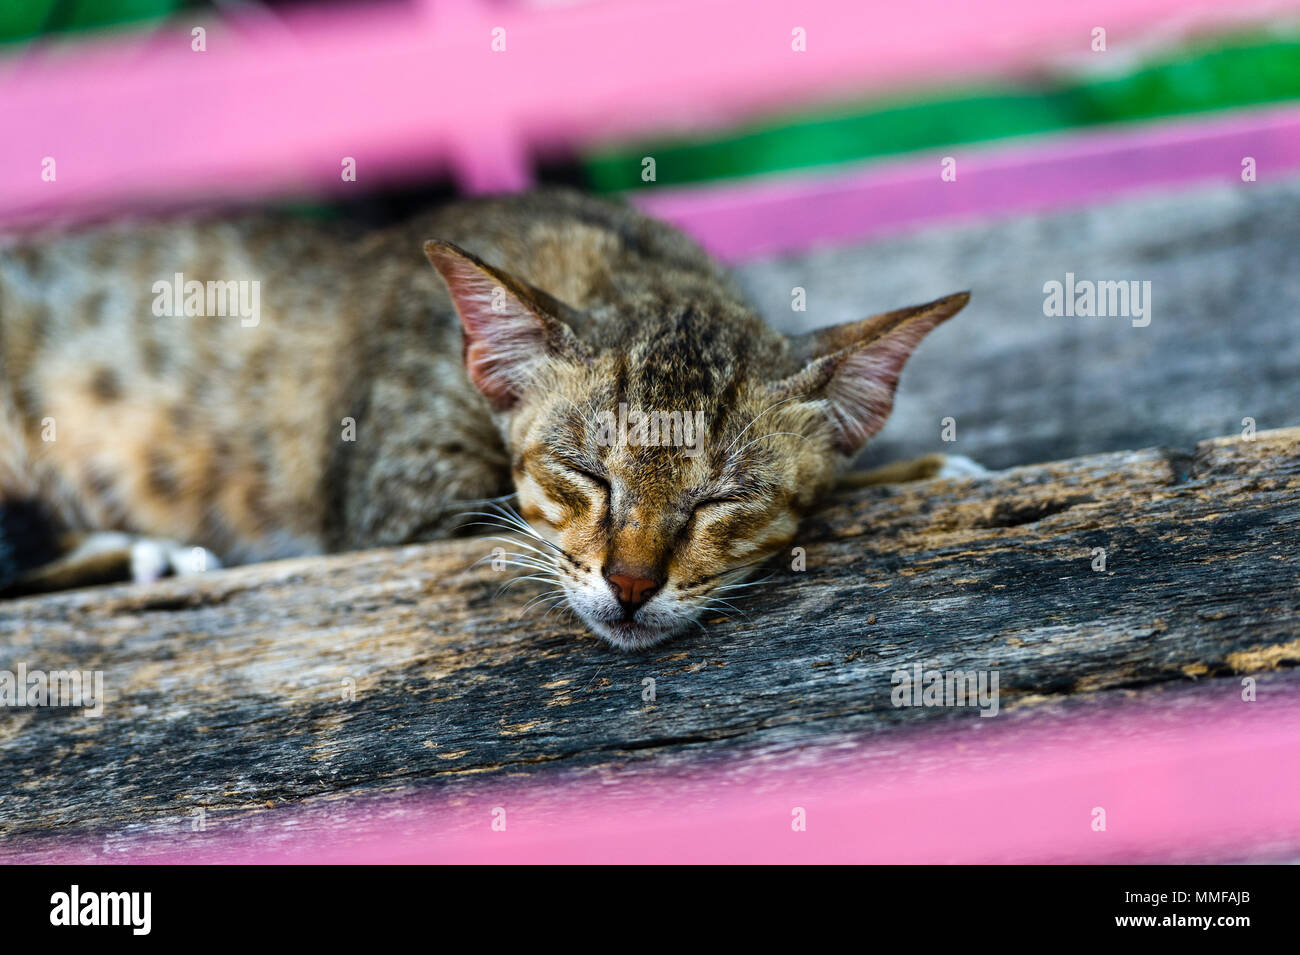 A street cat fast asleep on a wooden step. Stock Photo